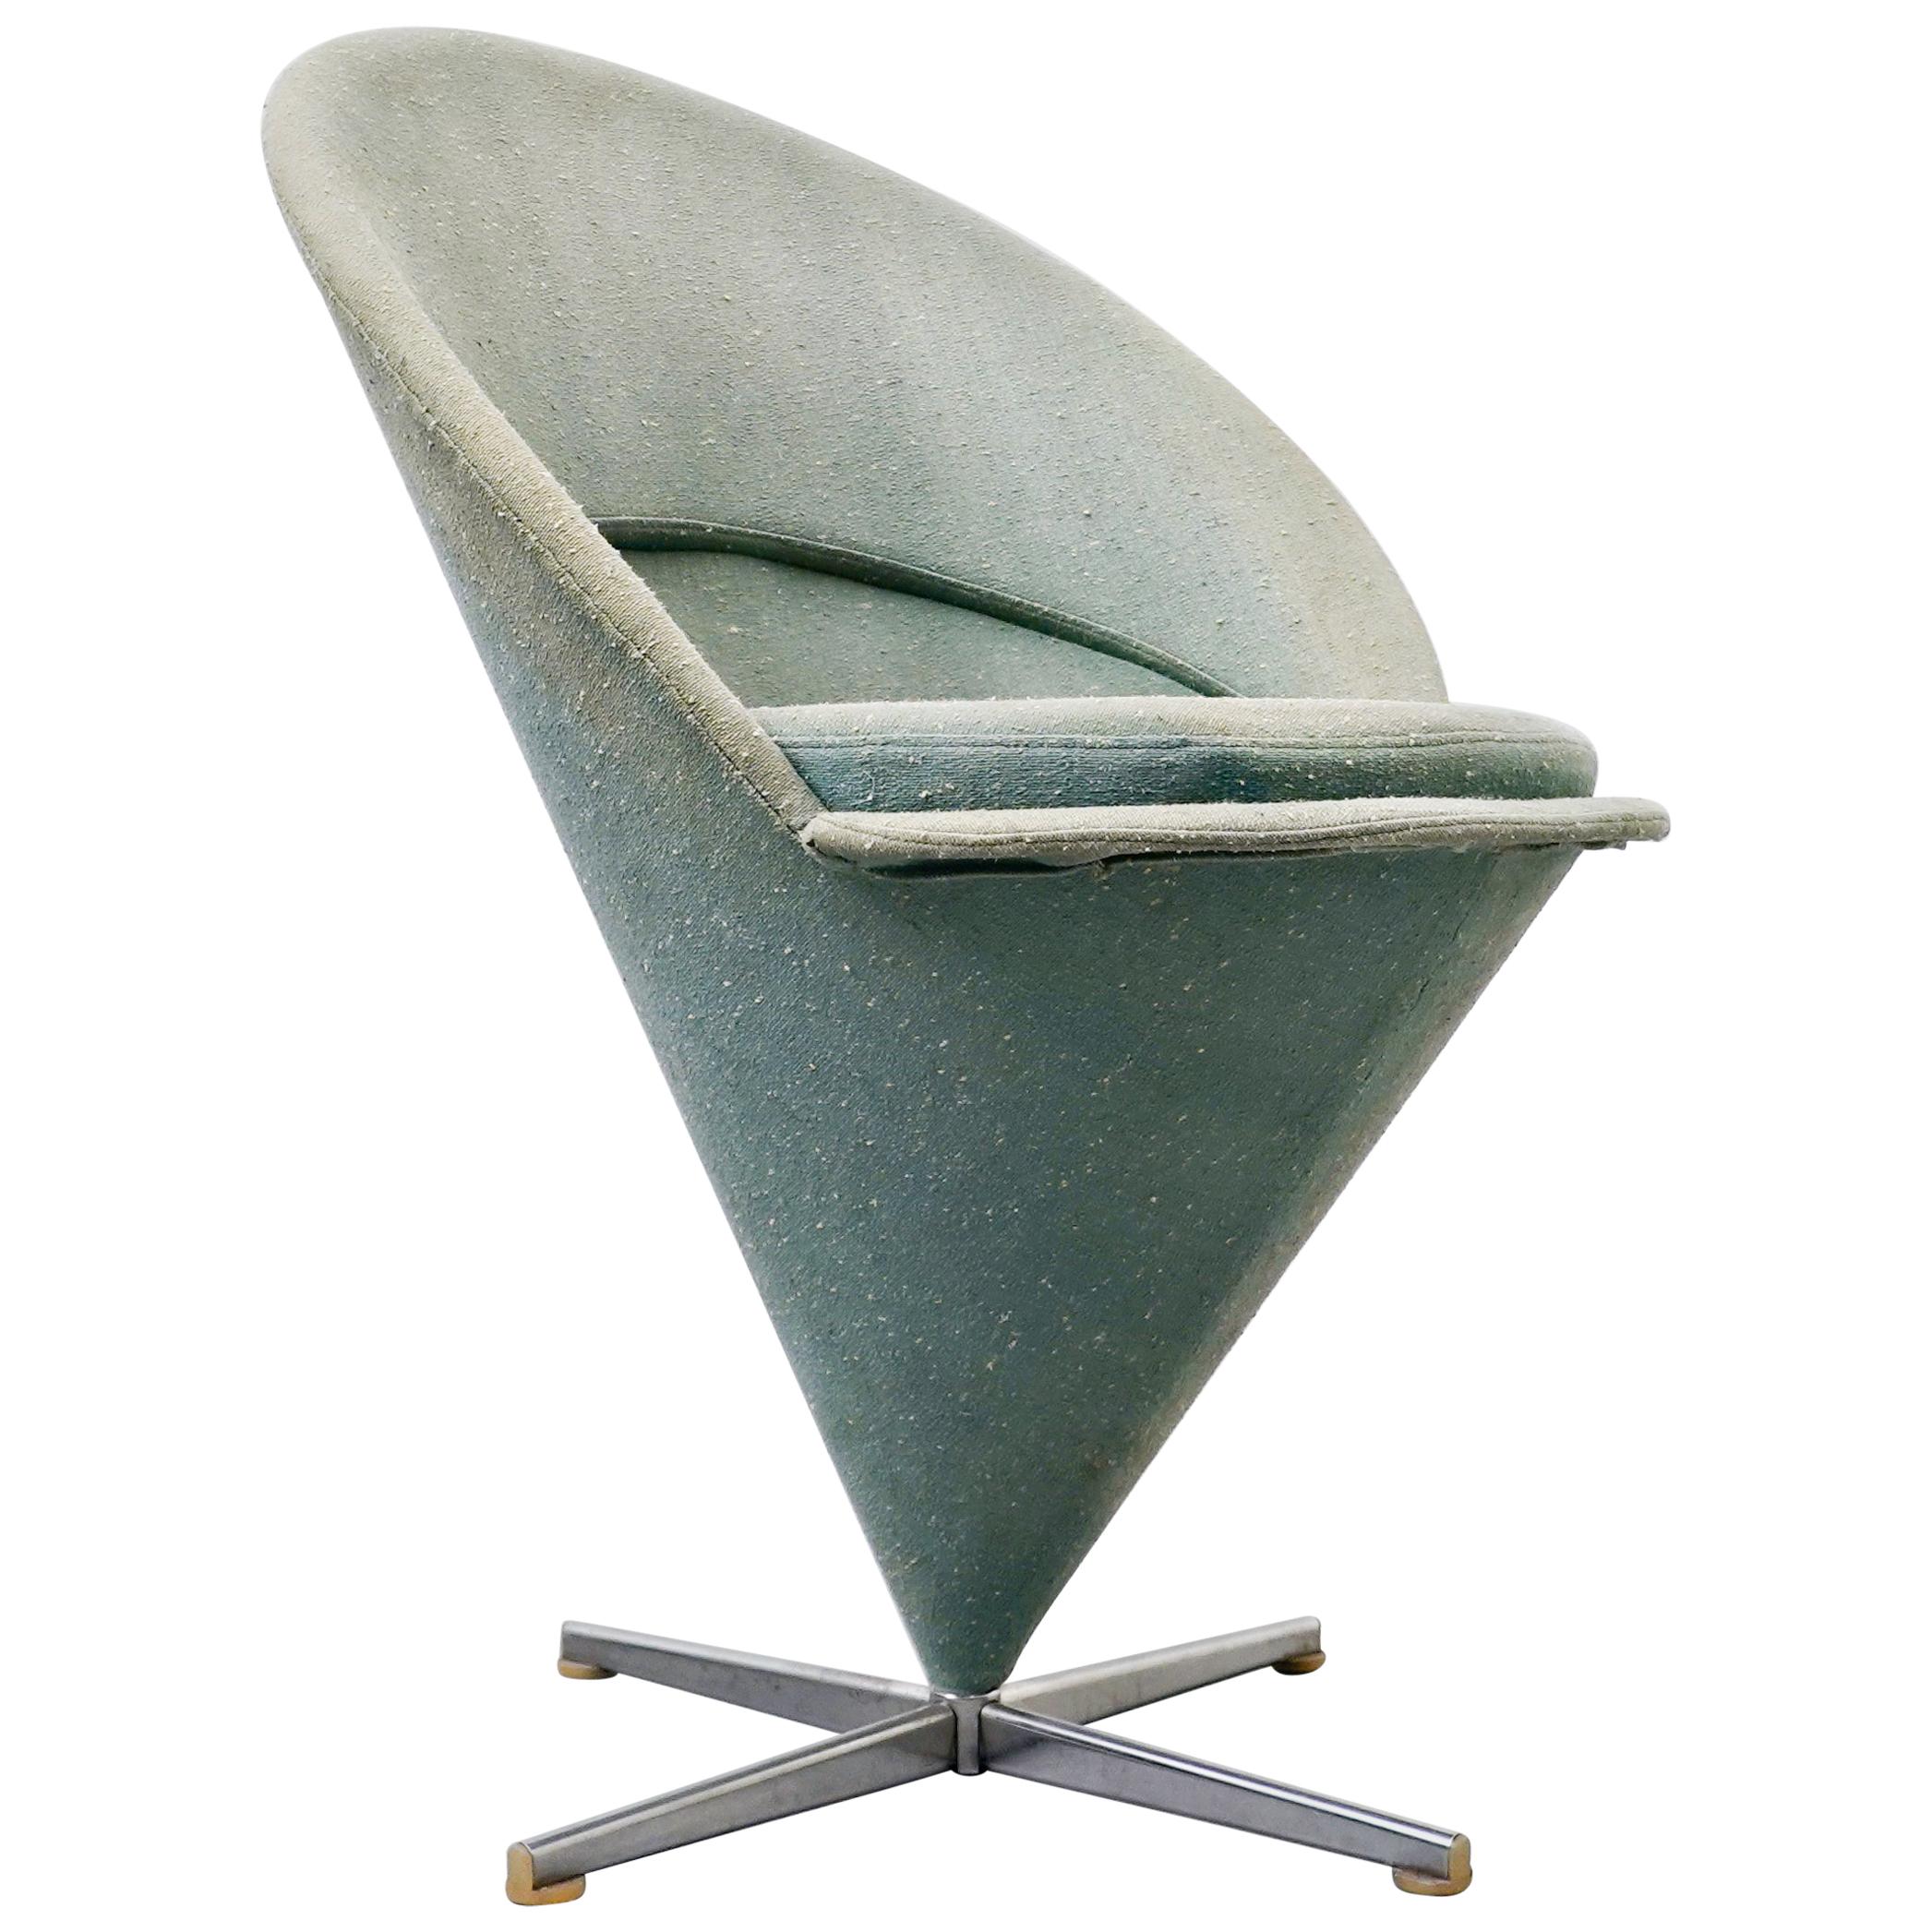 Verner Panton Cone Chair, First Edition